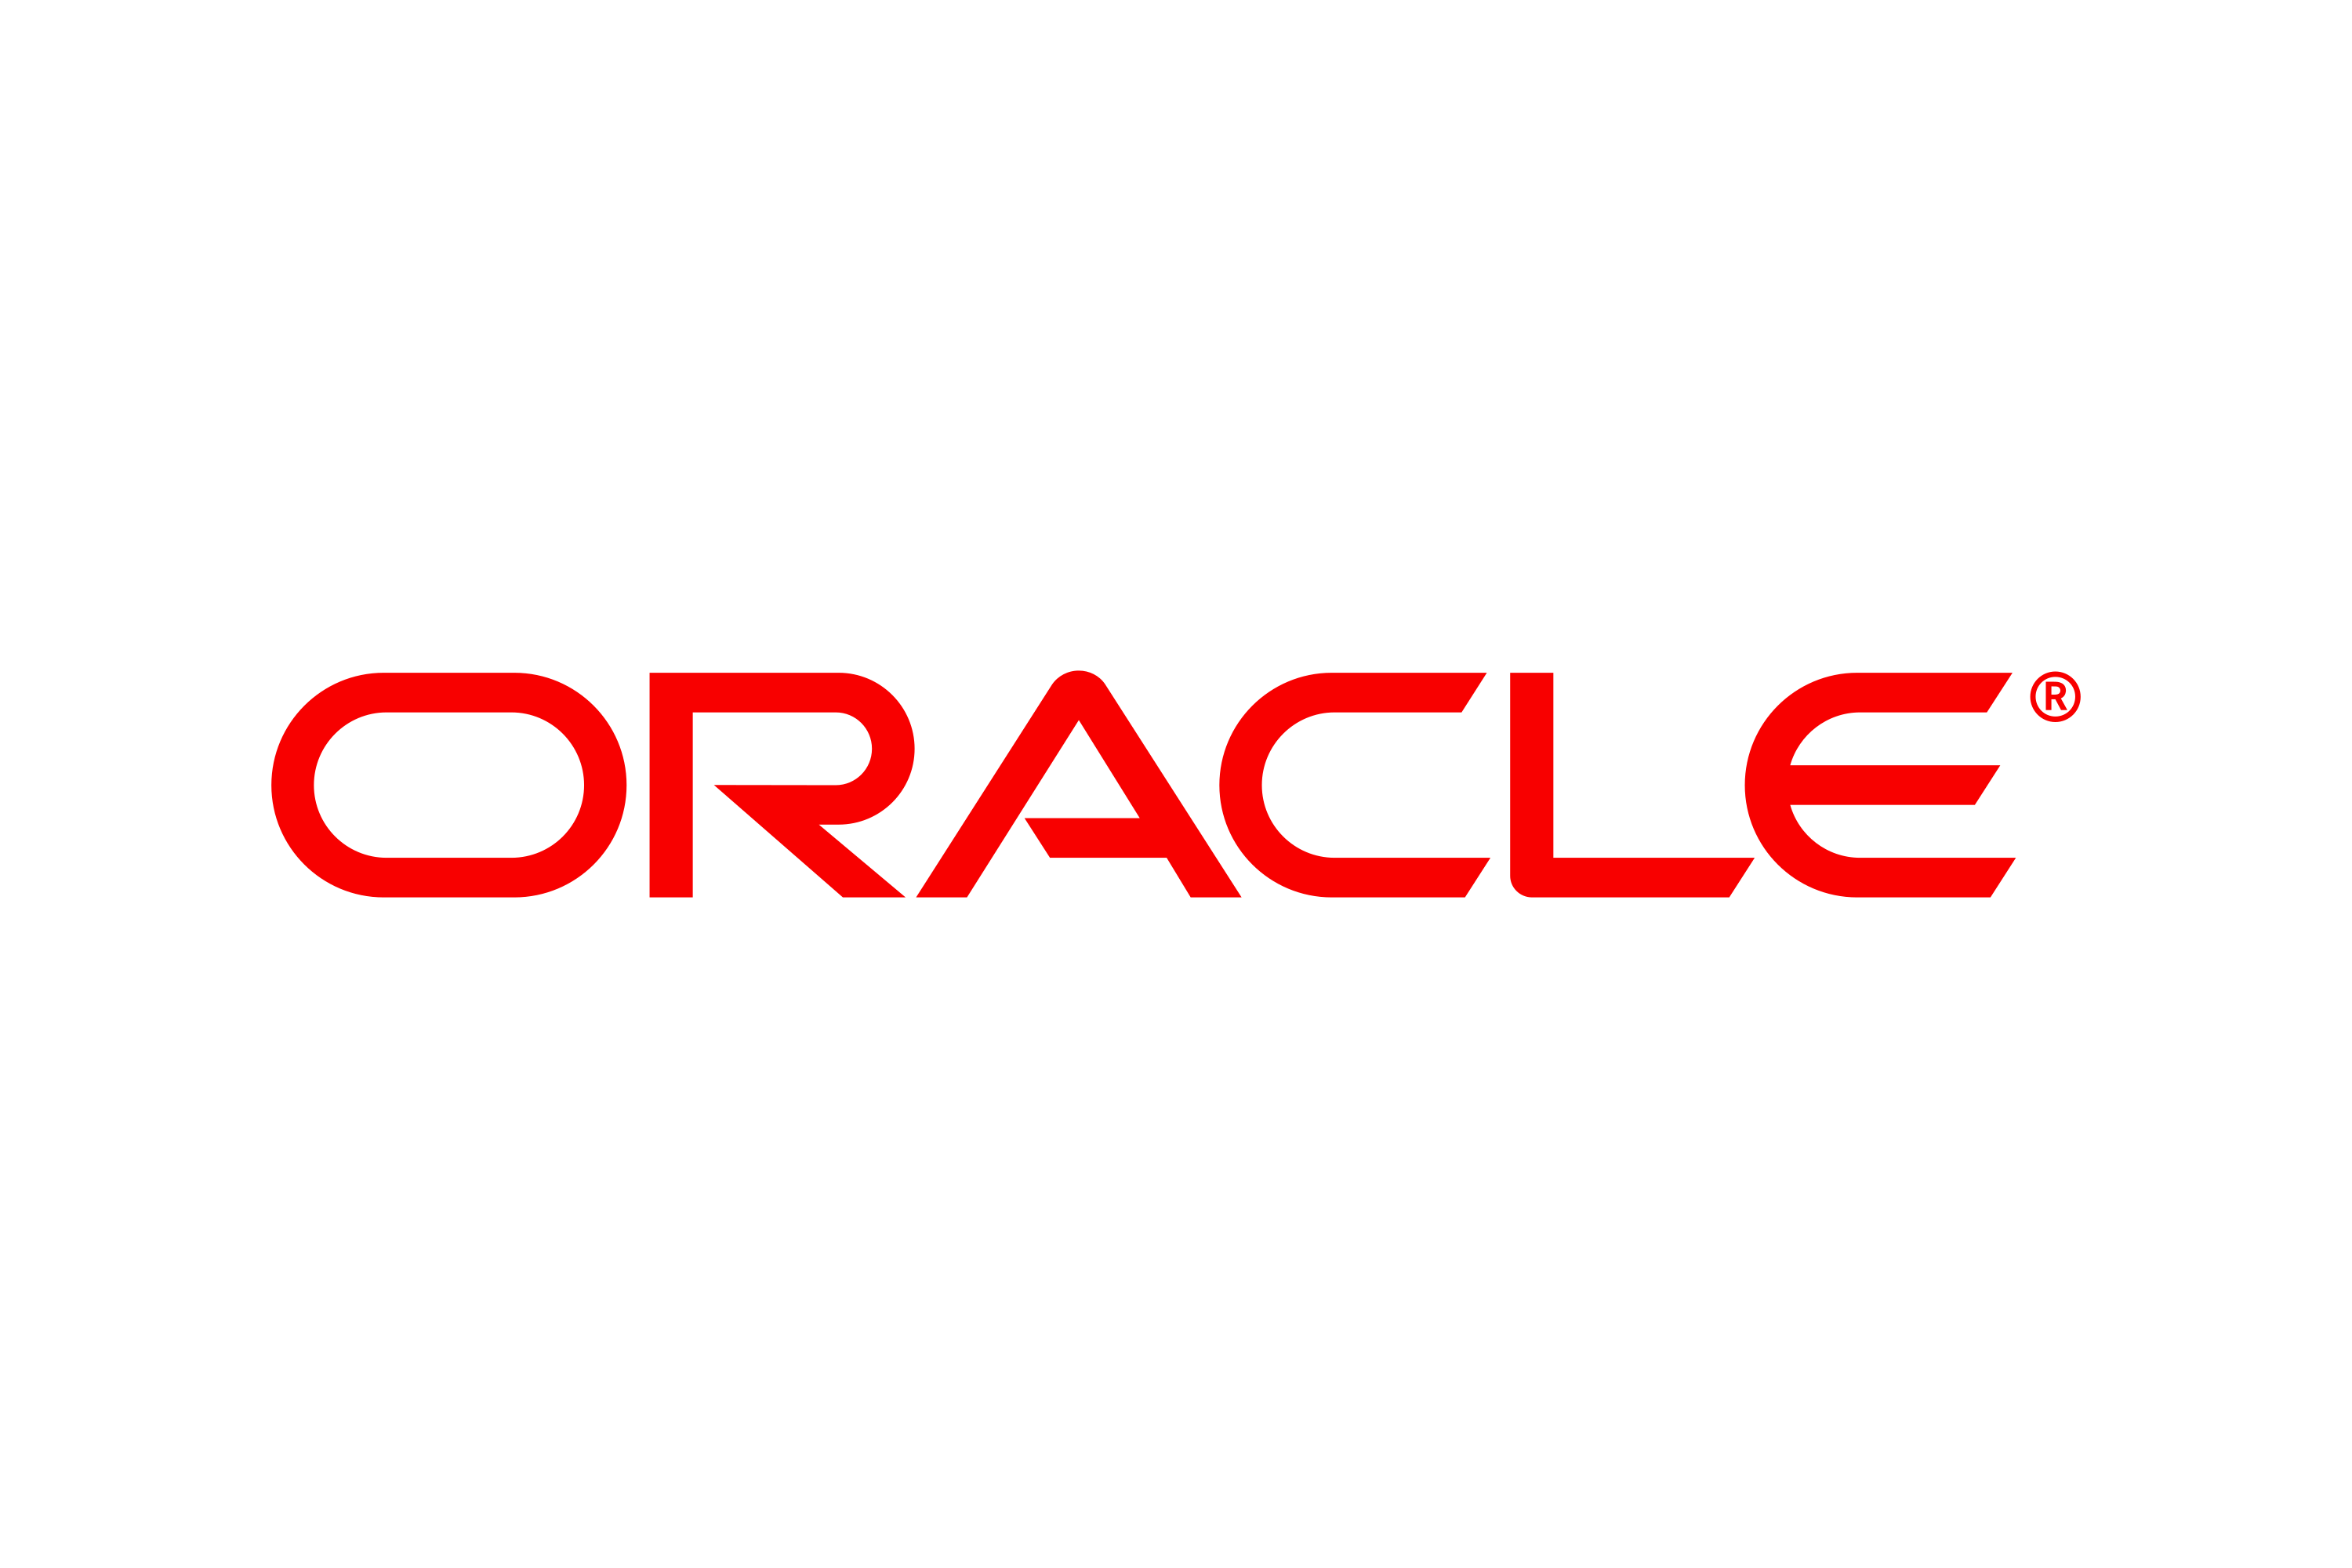 Download Oracle Database (Oracle RDBMS) Logo in SVG Vector or PNG File